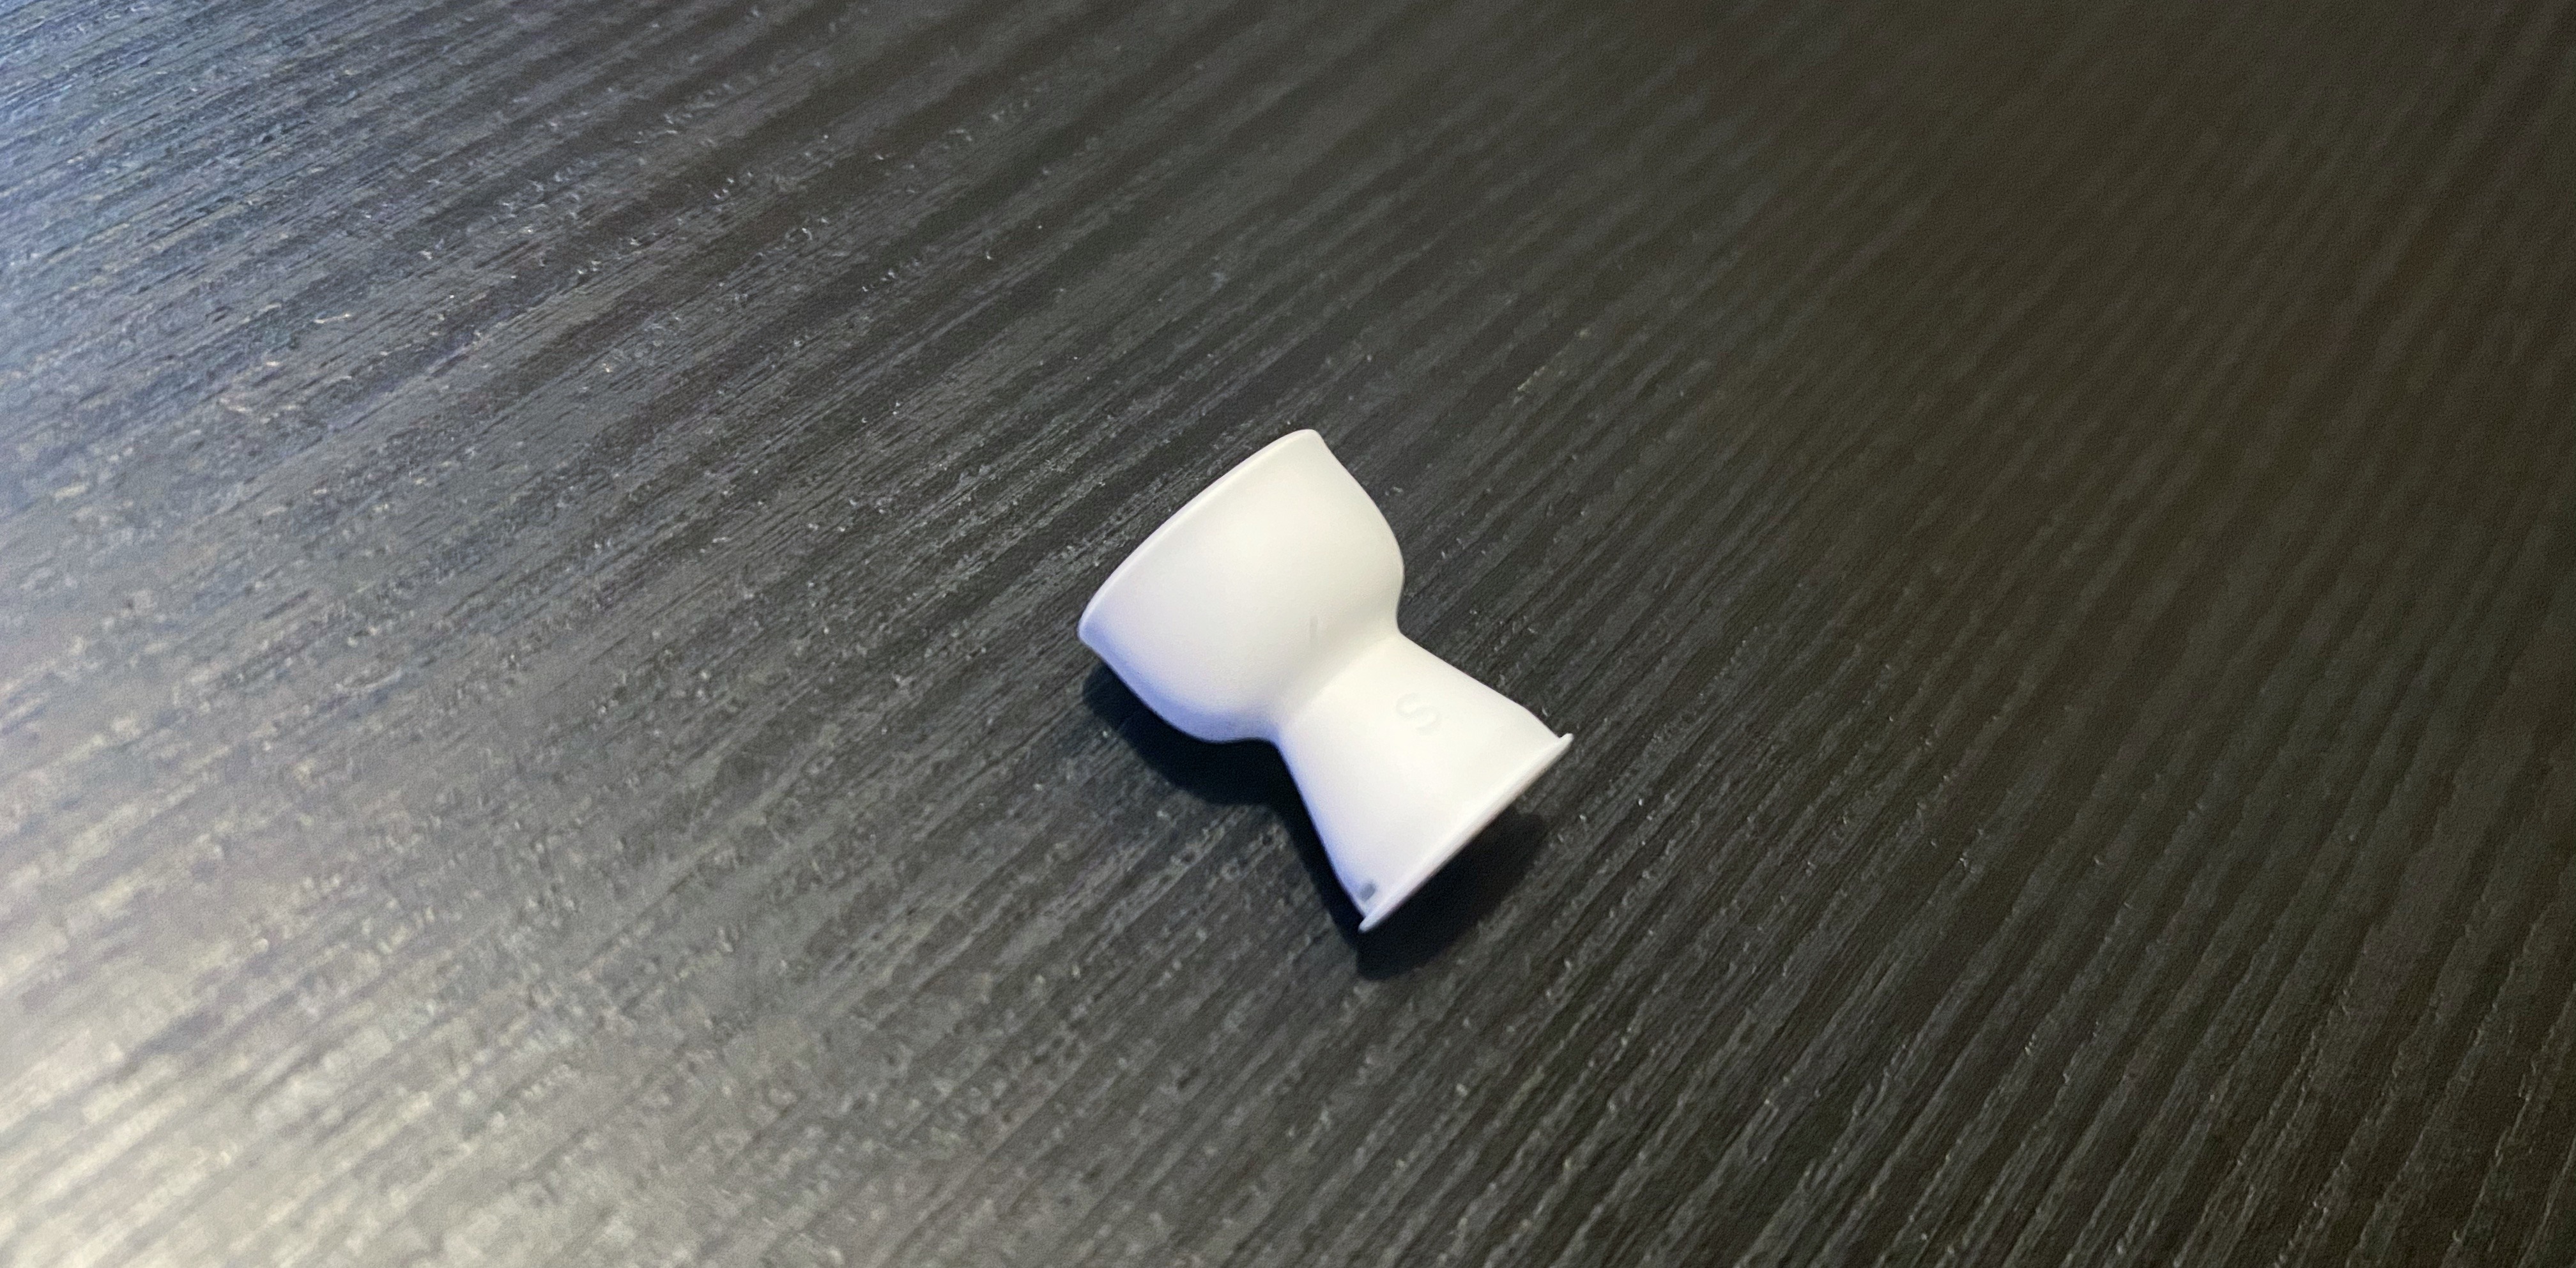 Pull out the silicone part of the AirPods Pro's tips.